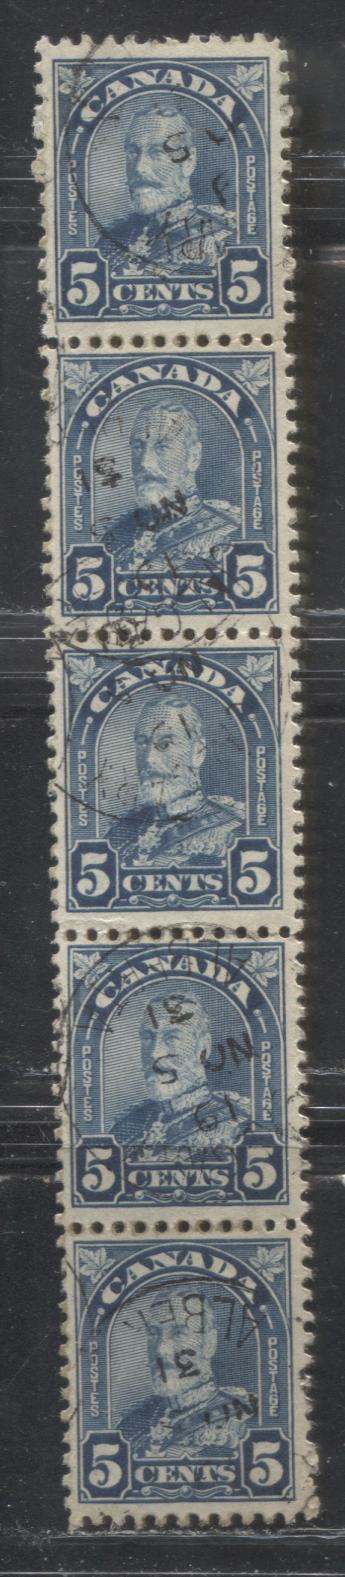 Lot 196 Canada #170i 5c Milky Blue King George V, 1930-1935 Arch Issue, A VF CDS Used Vertical Strip of 5, November 5, 1931 Calgary CDS Cancel